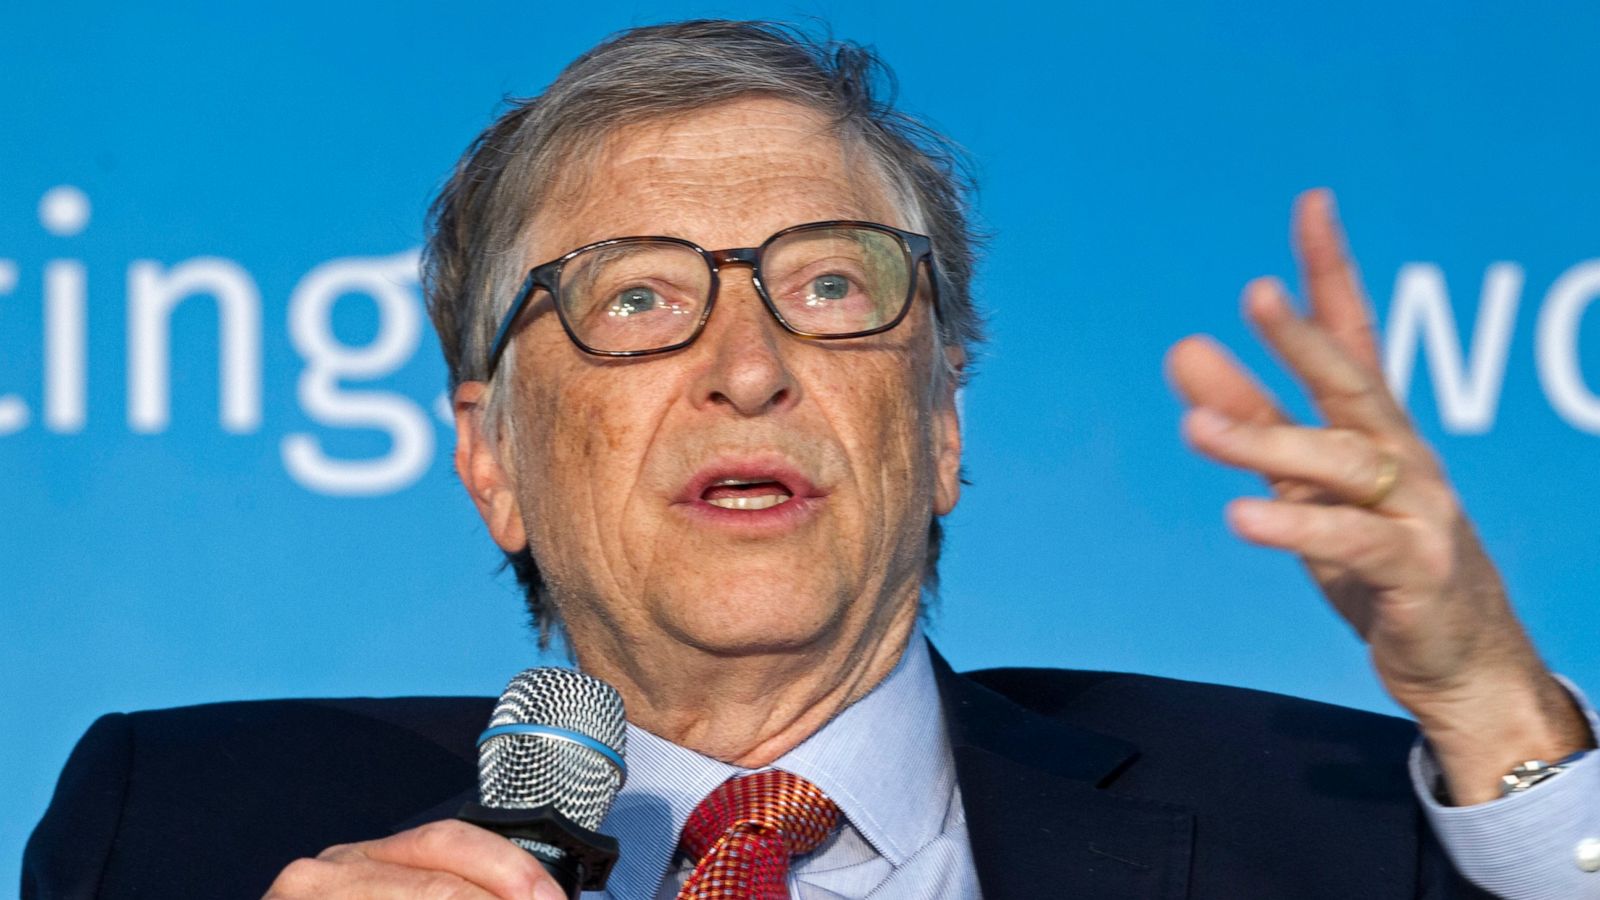 Bill Gates says he is stepping down from Microsoft board - ABC News